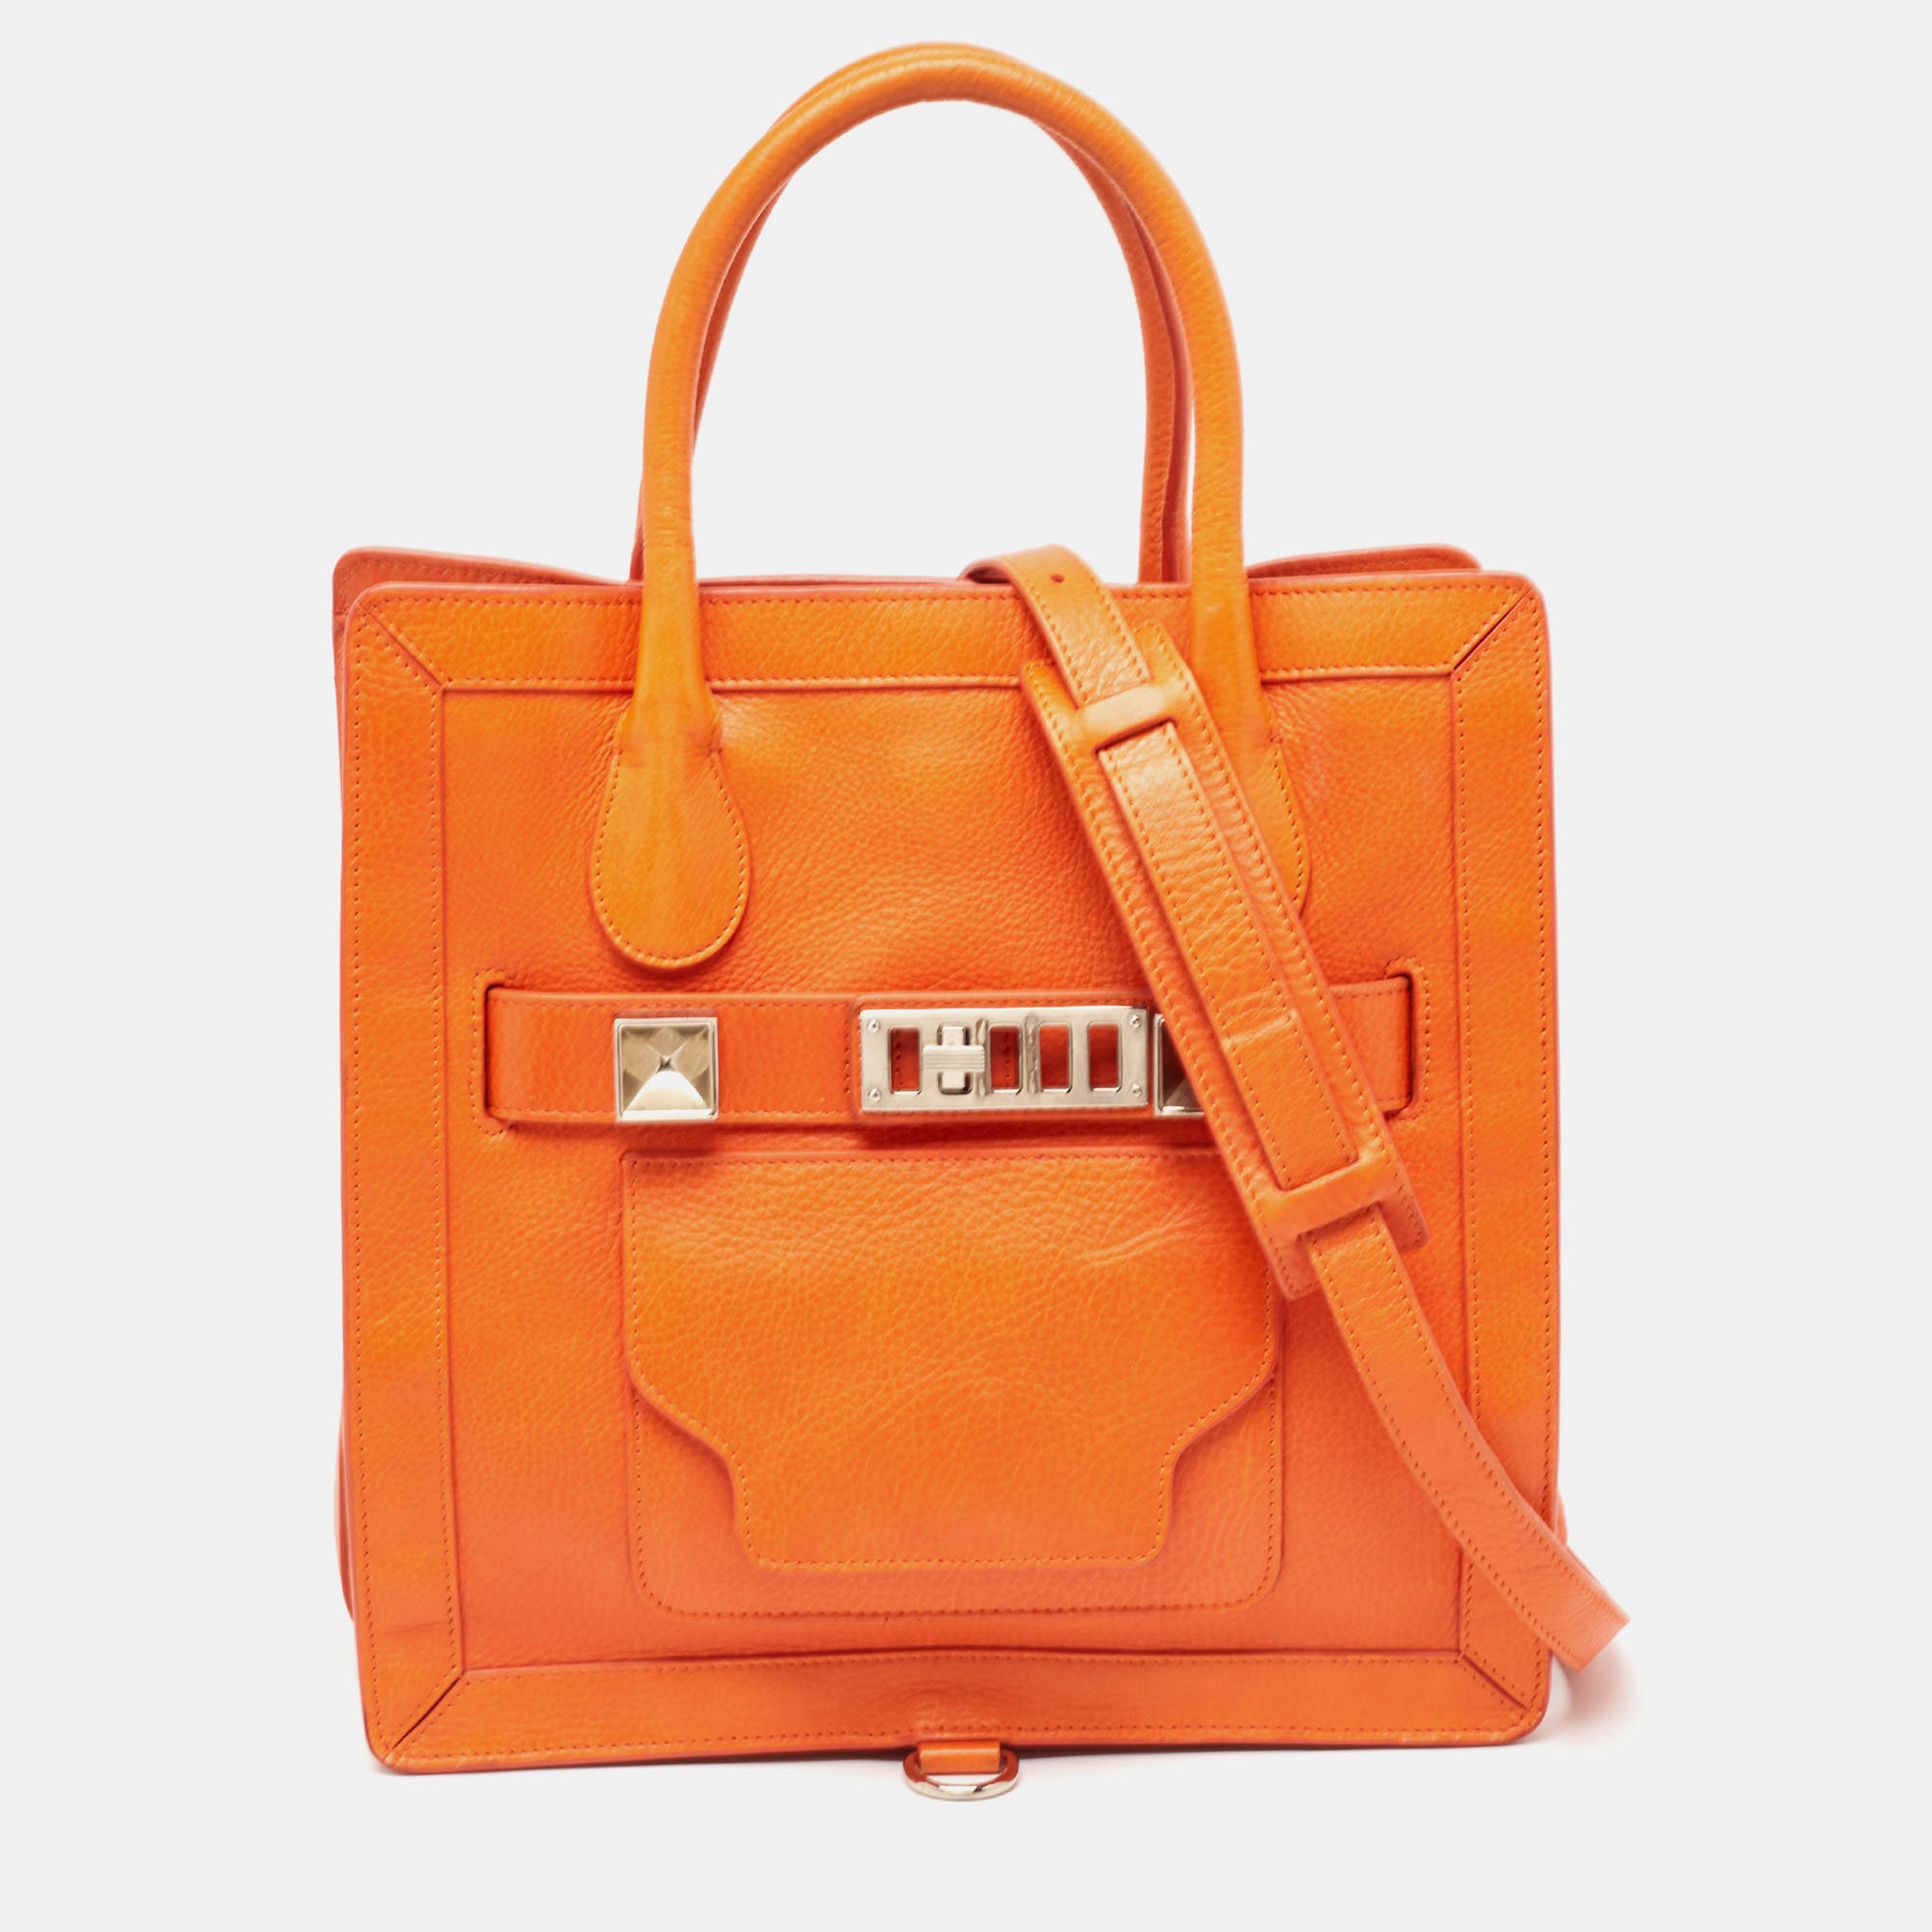 Pre-owned Proenza Schouler Orange Leather Ps11 Tote